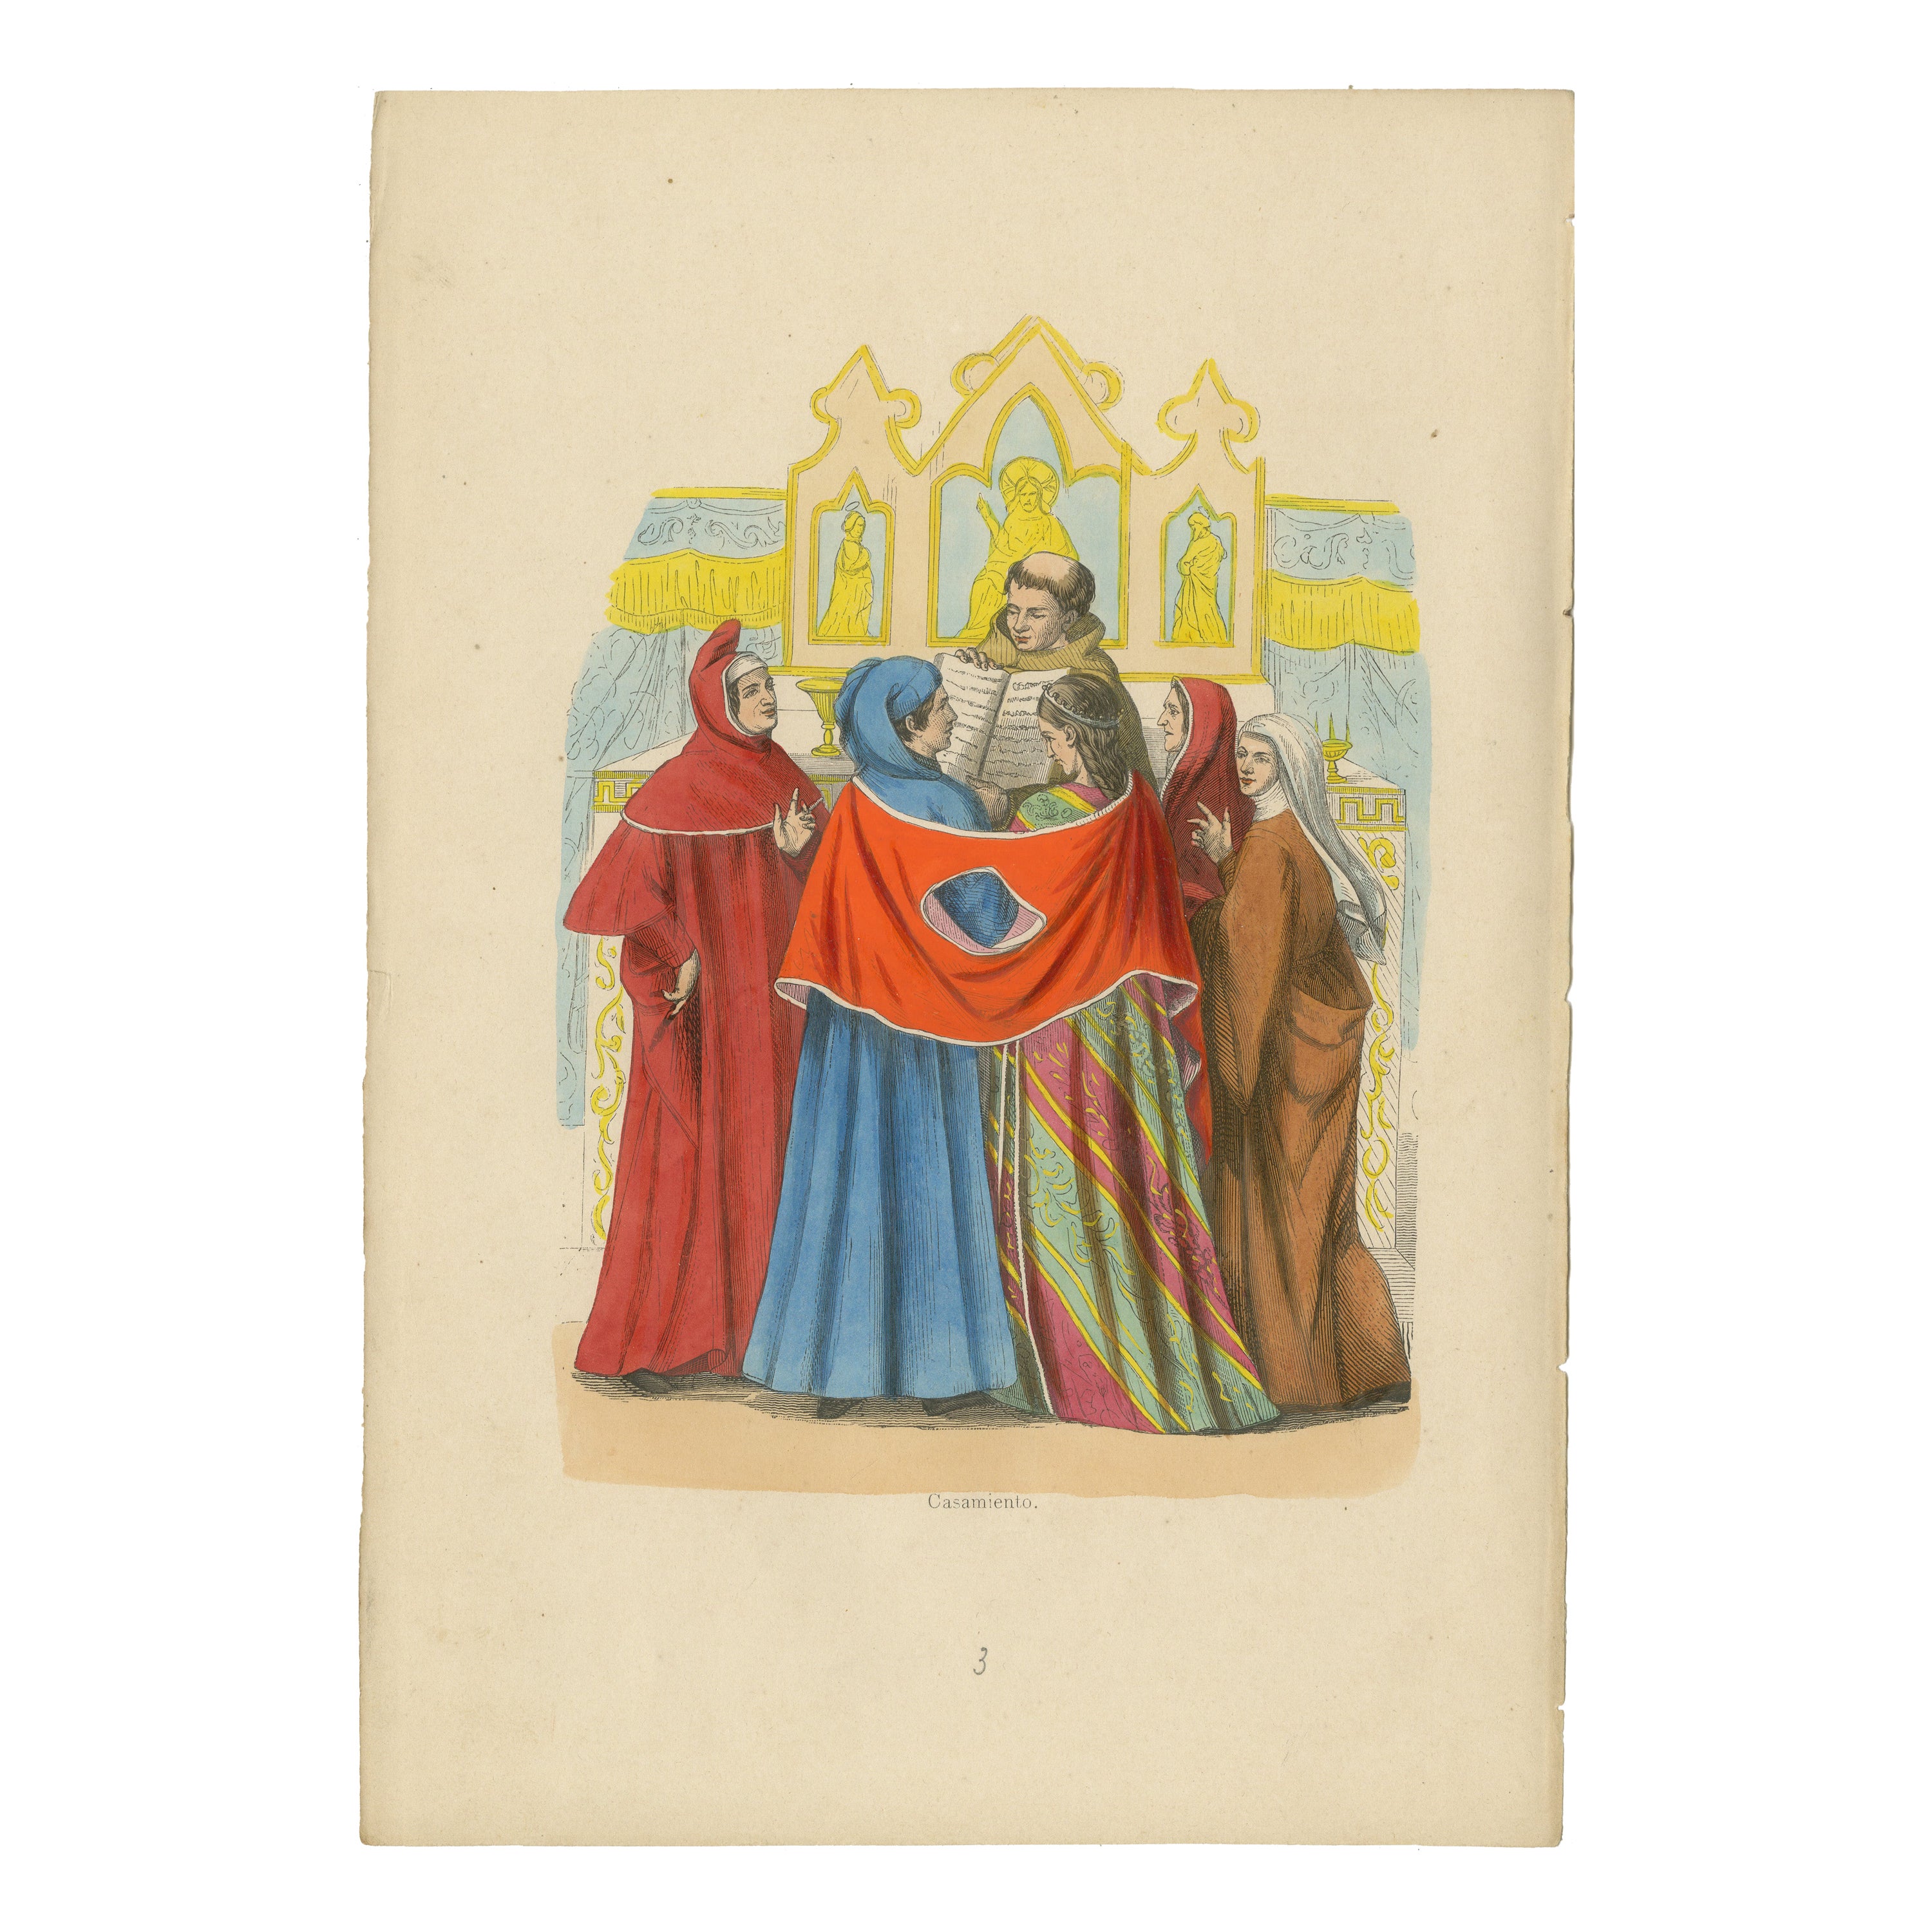 Medieval Matrimony: A Union in the Gothic Halls, Hand-Colored in 1847